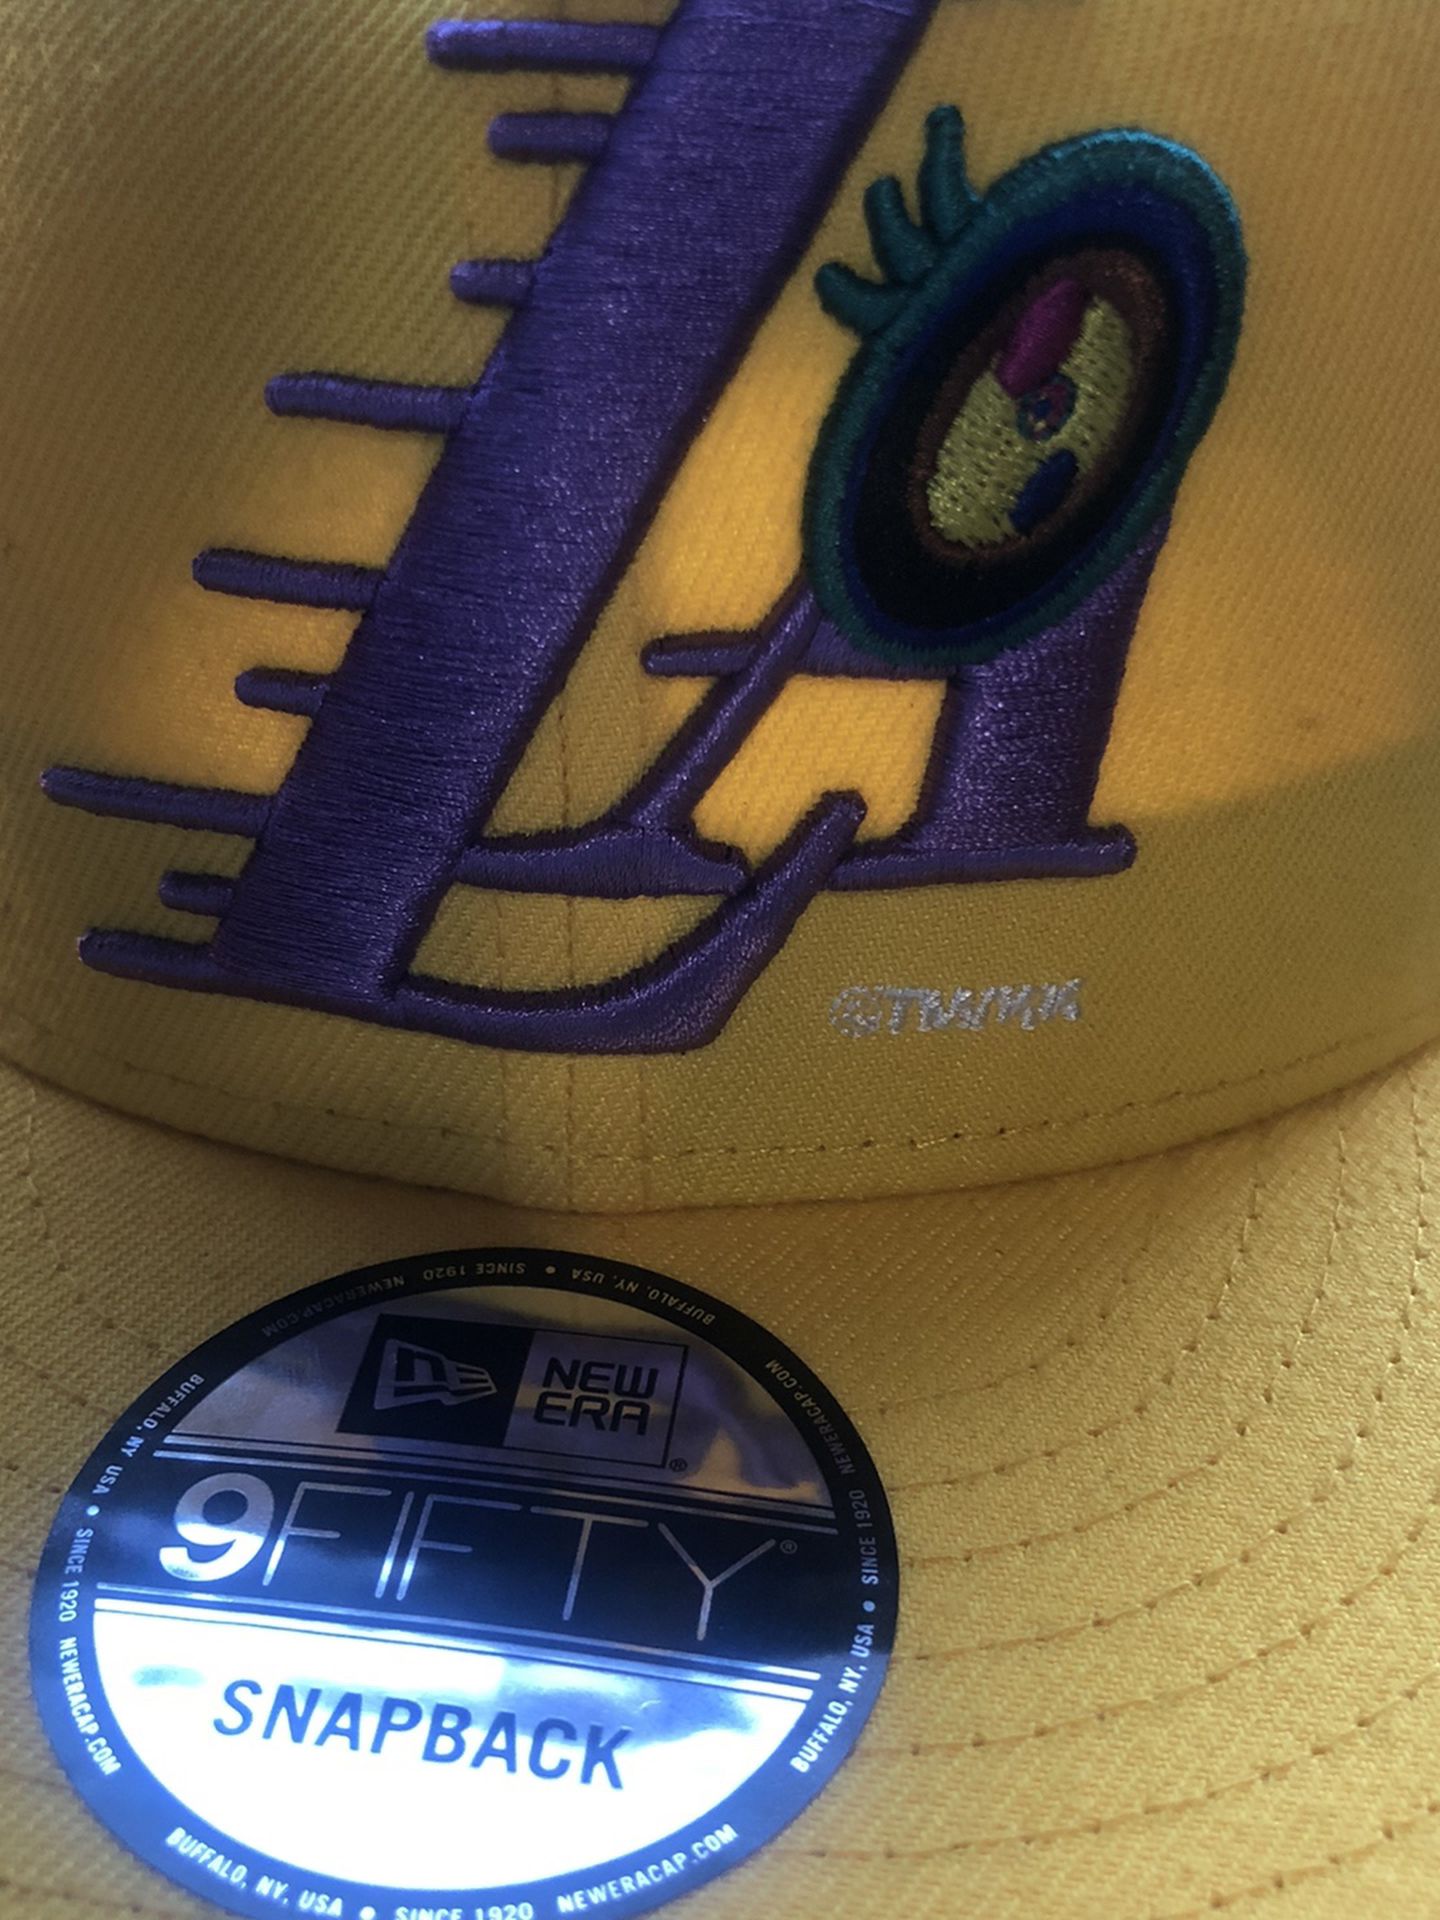 The new Takashi Murakami x Los Angeles Lakers collection